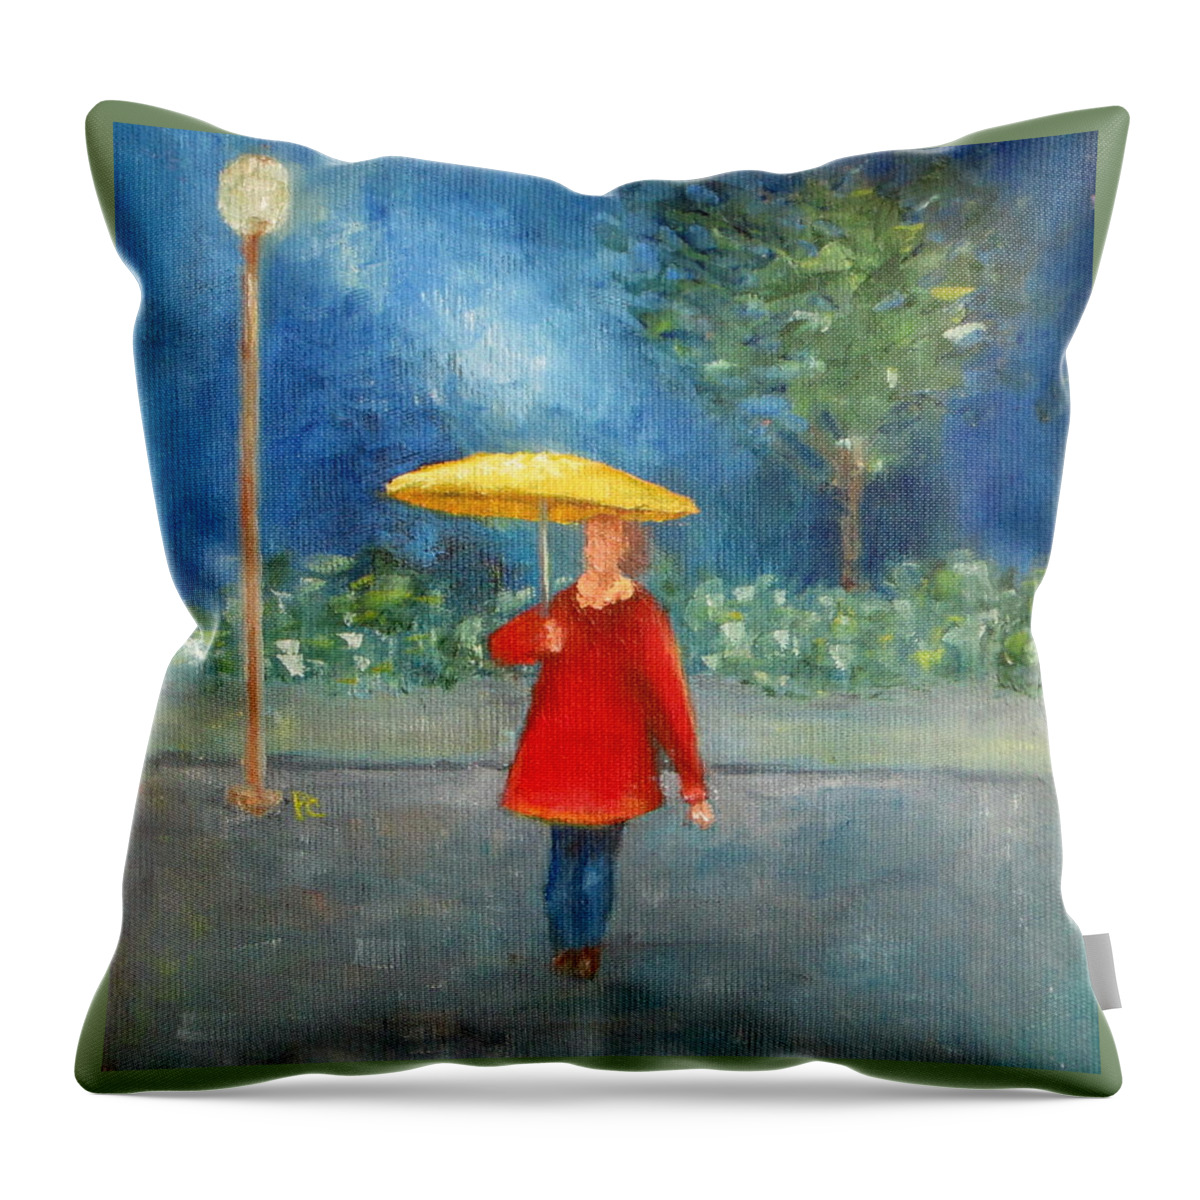 Girl Throw Pillow featuring the painting Evening Rain by Patricia Cleasby